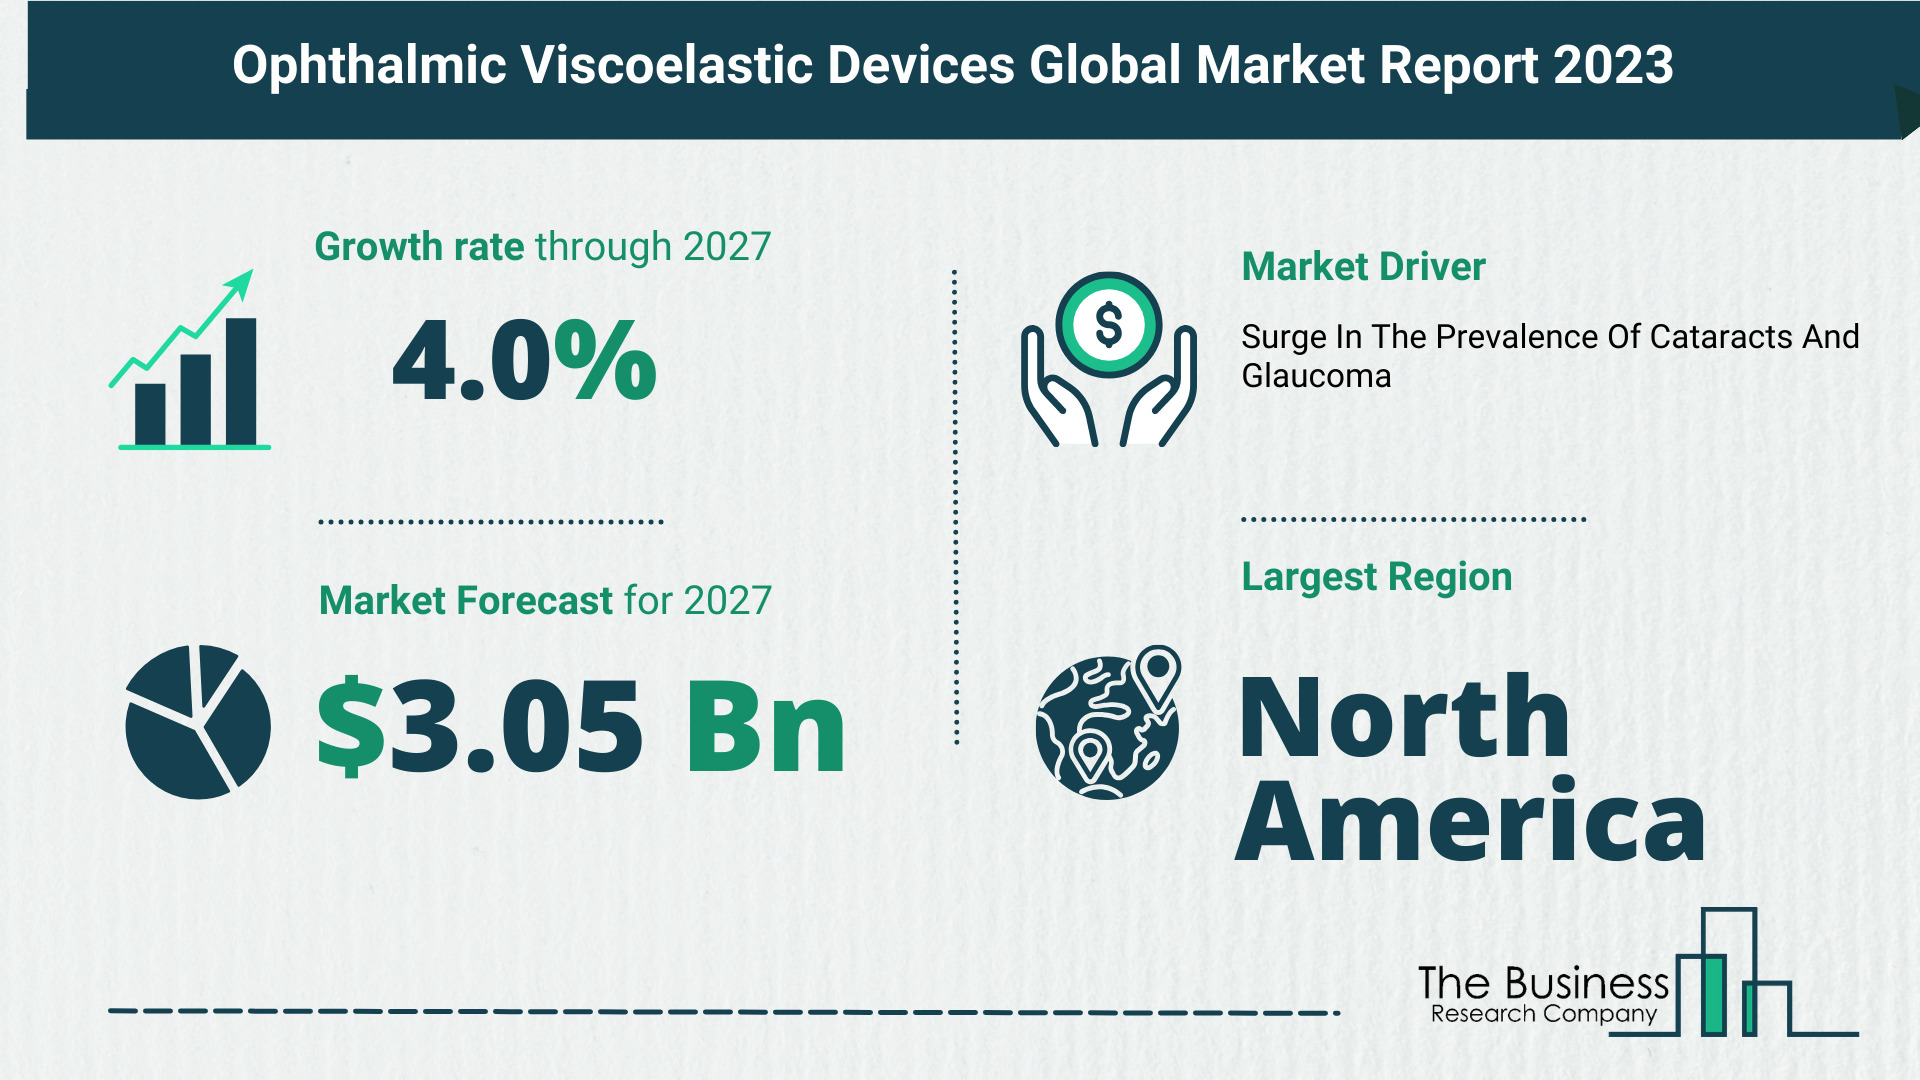 5 Key Insights On The Ophthalmic Viscoelastic Devices Market 2023